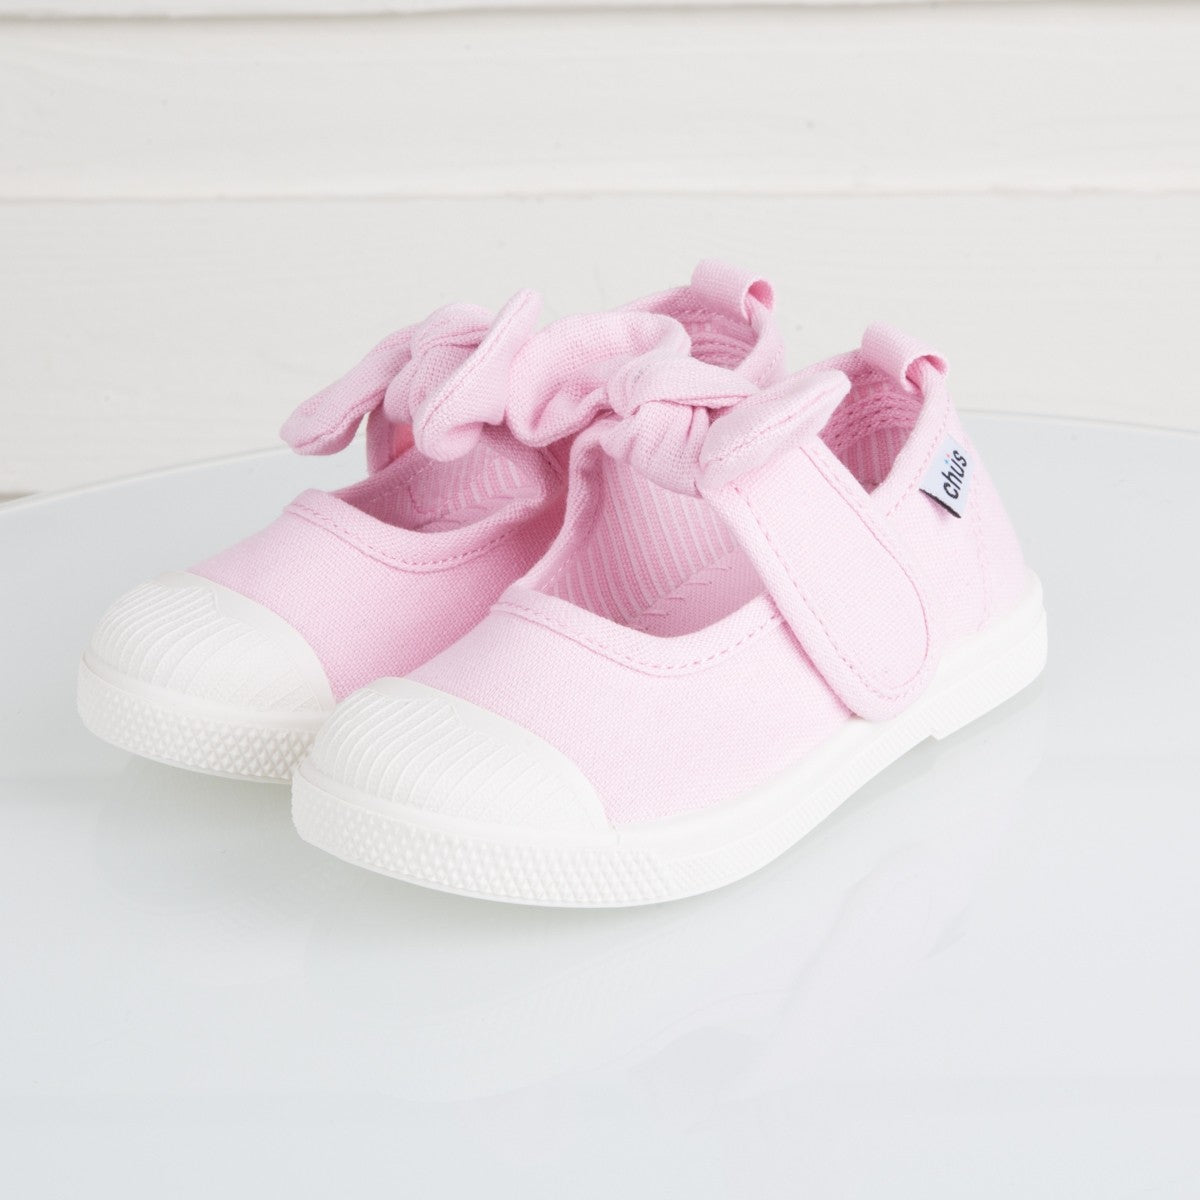 CHUS Athena Bow Shoe - Light Pink - mommie chic & me